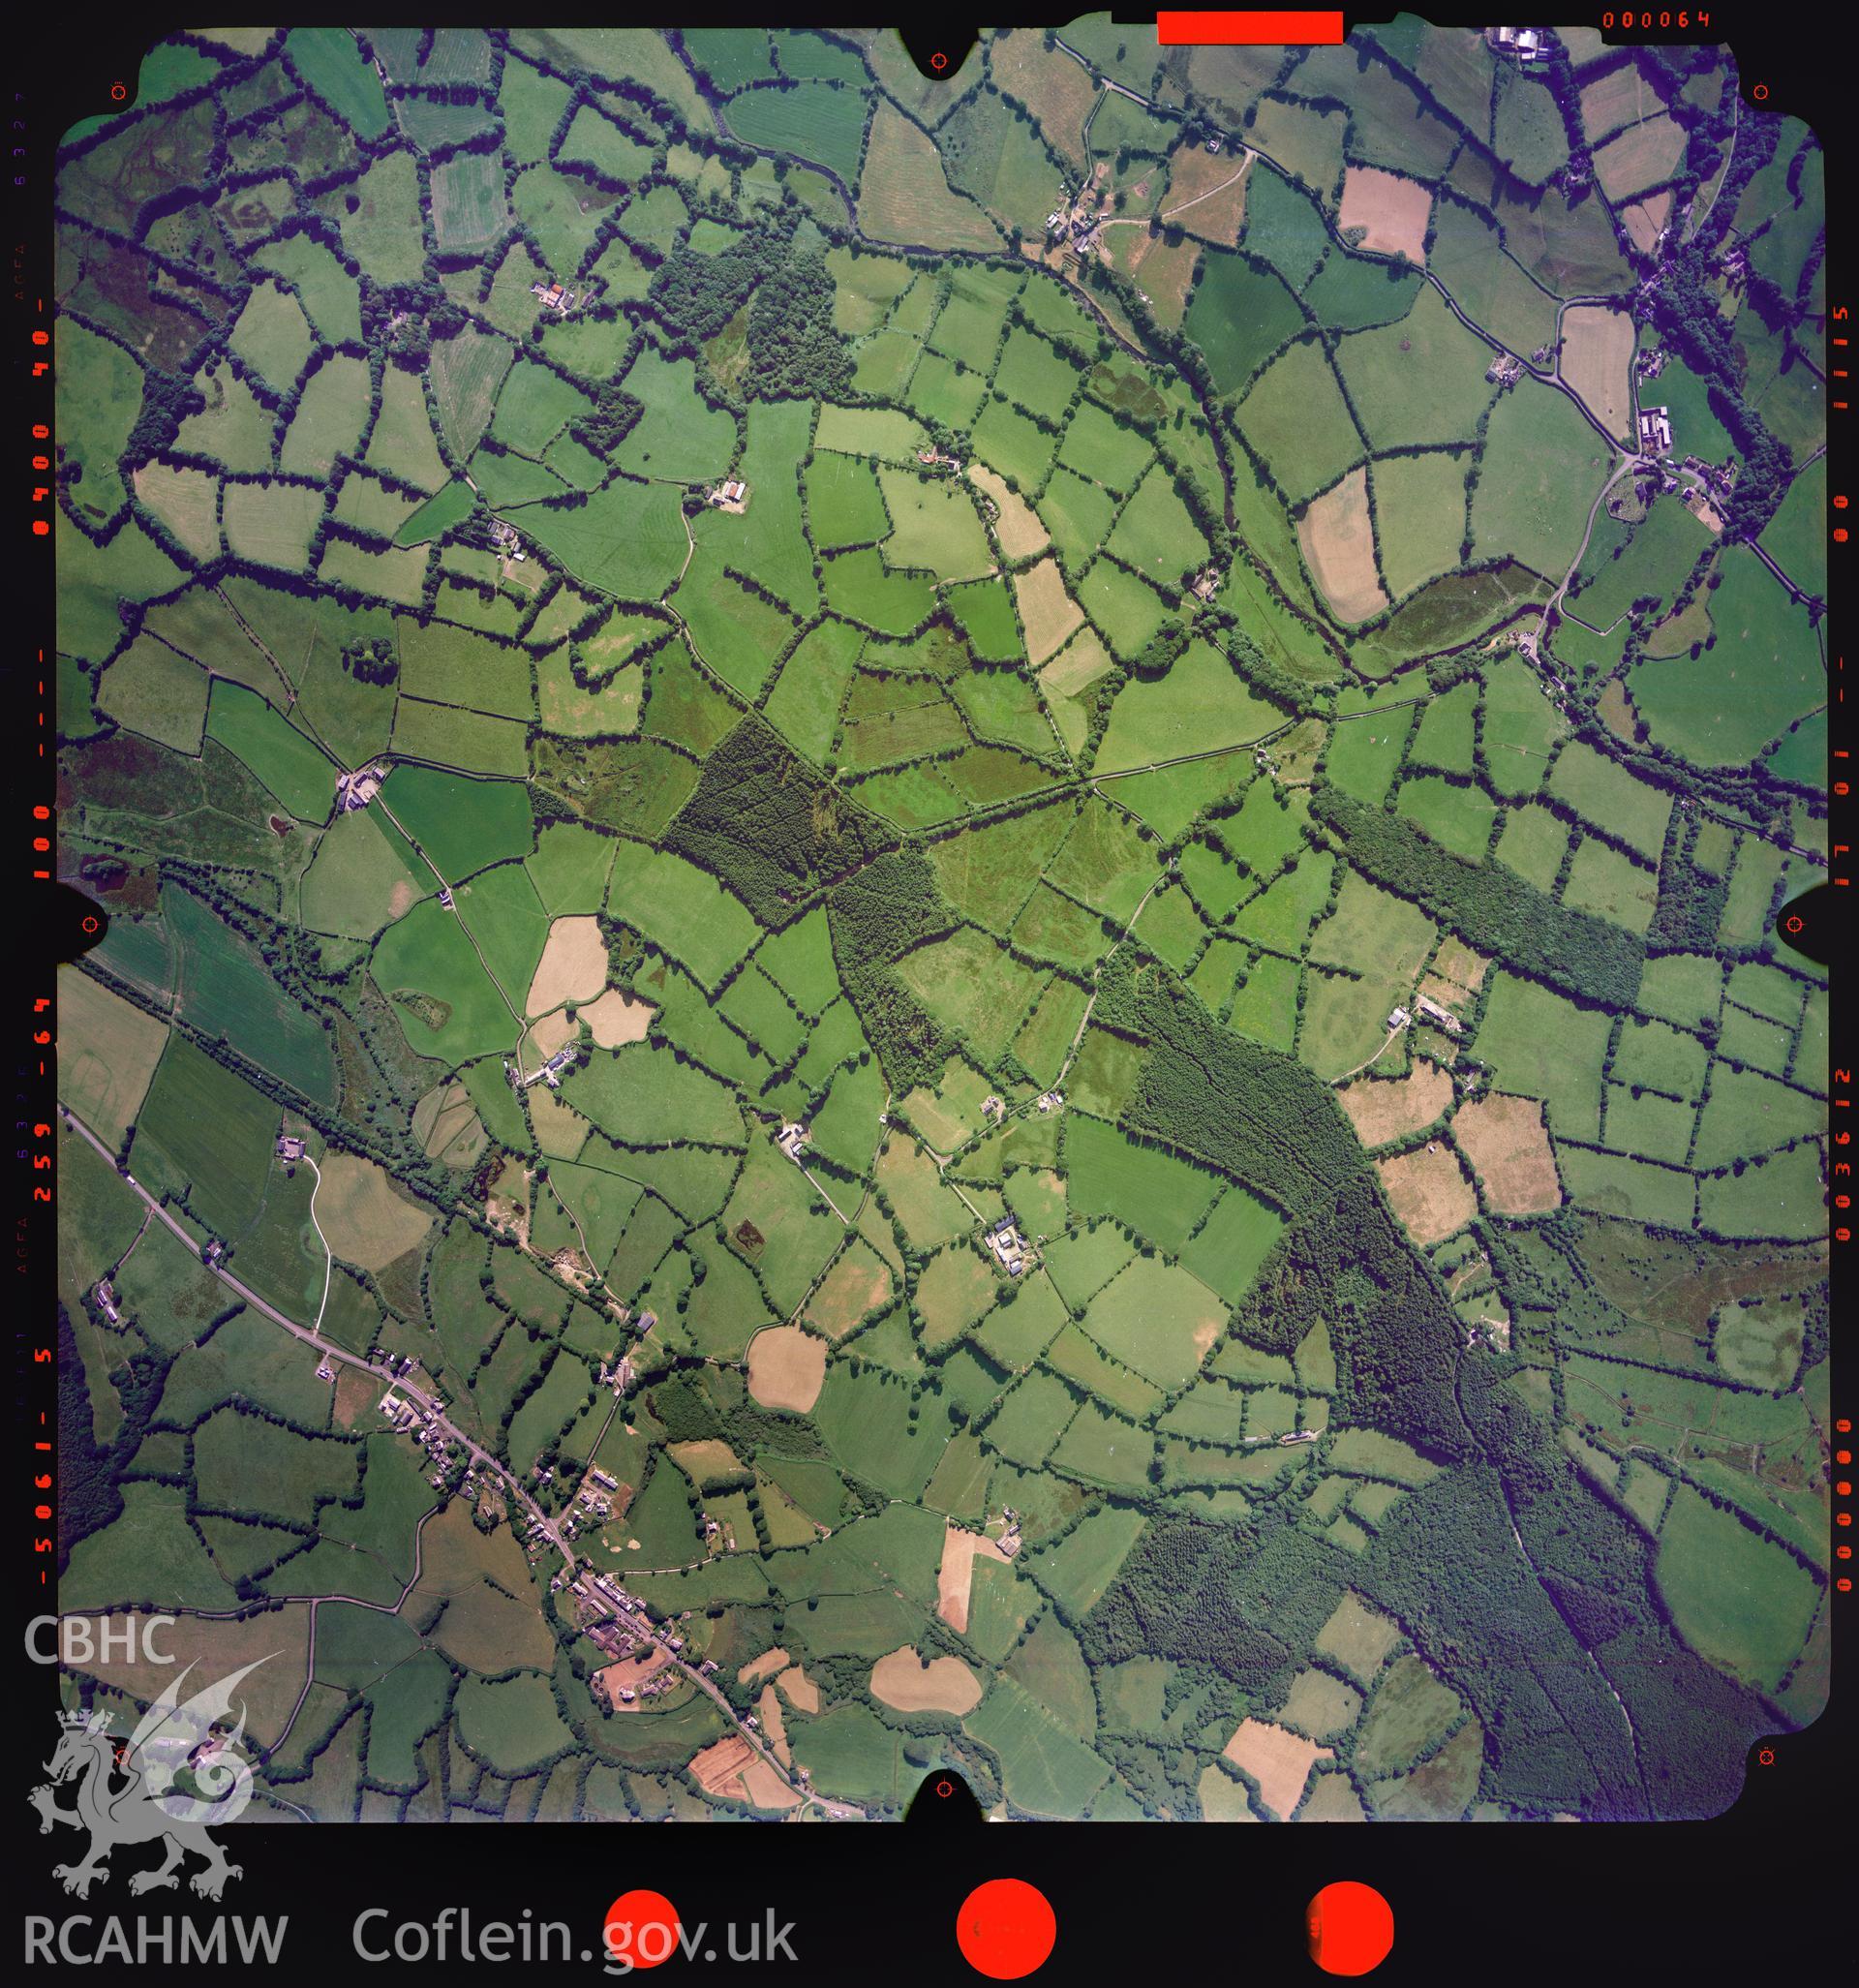 Digitized copy of a colour aerial photograph showing an area in Ceredigion, taken by Ordnance Survey, 2005.